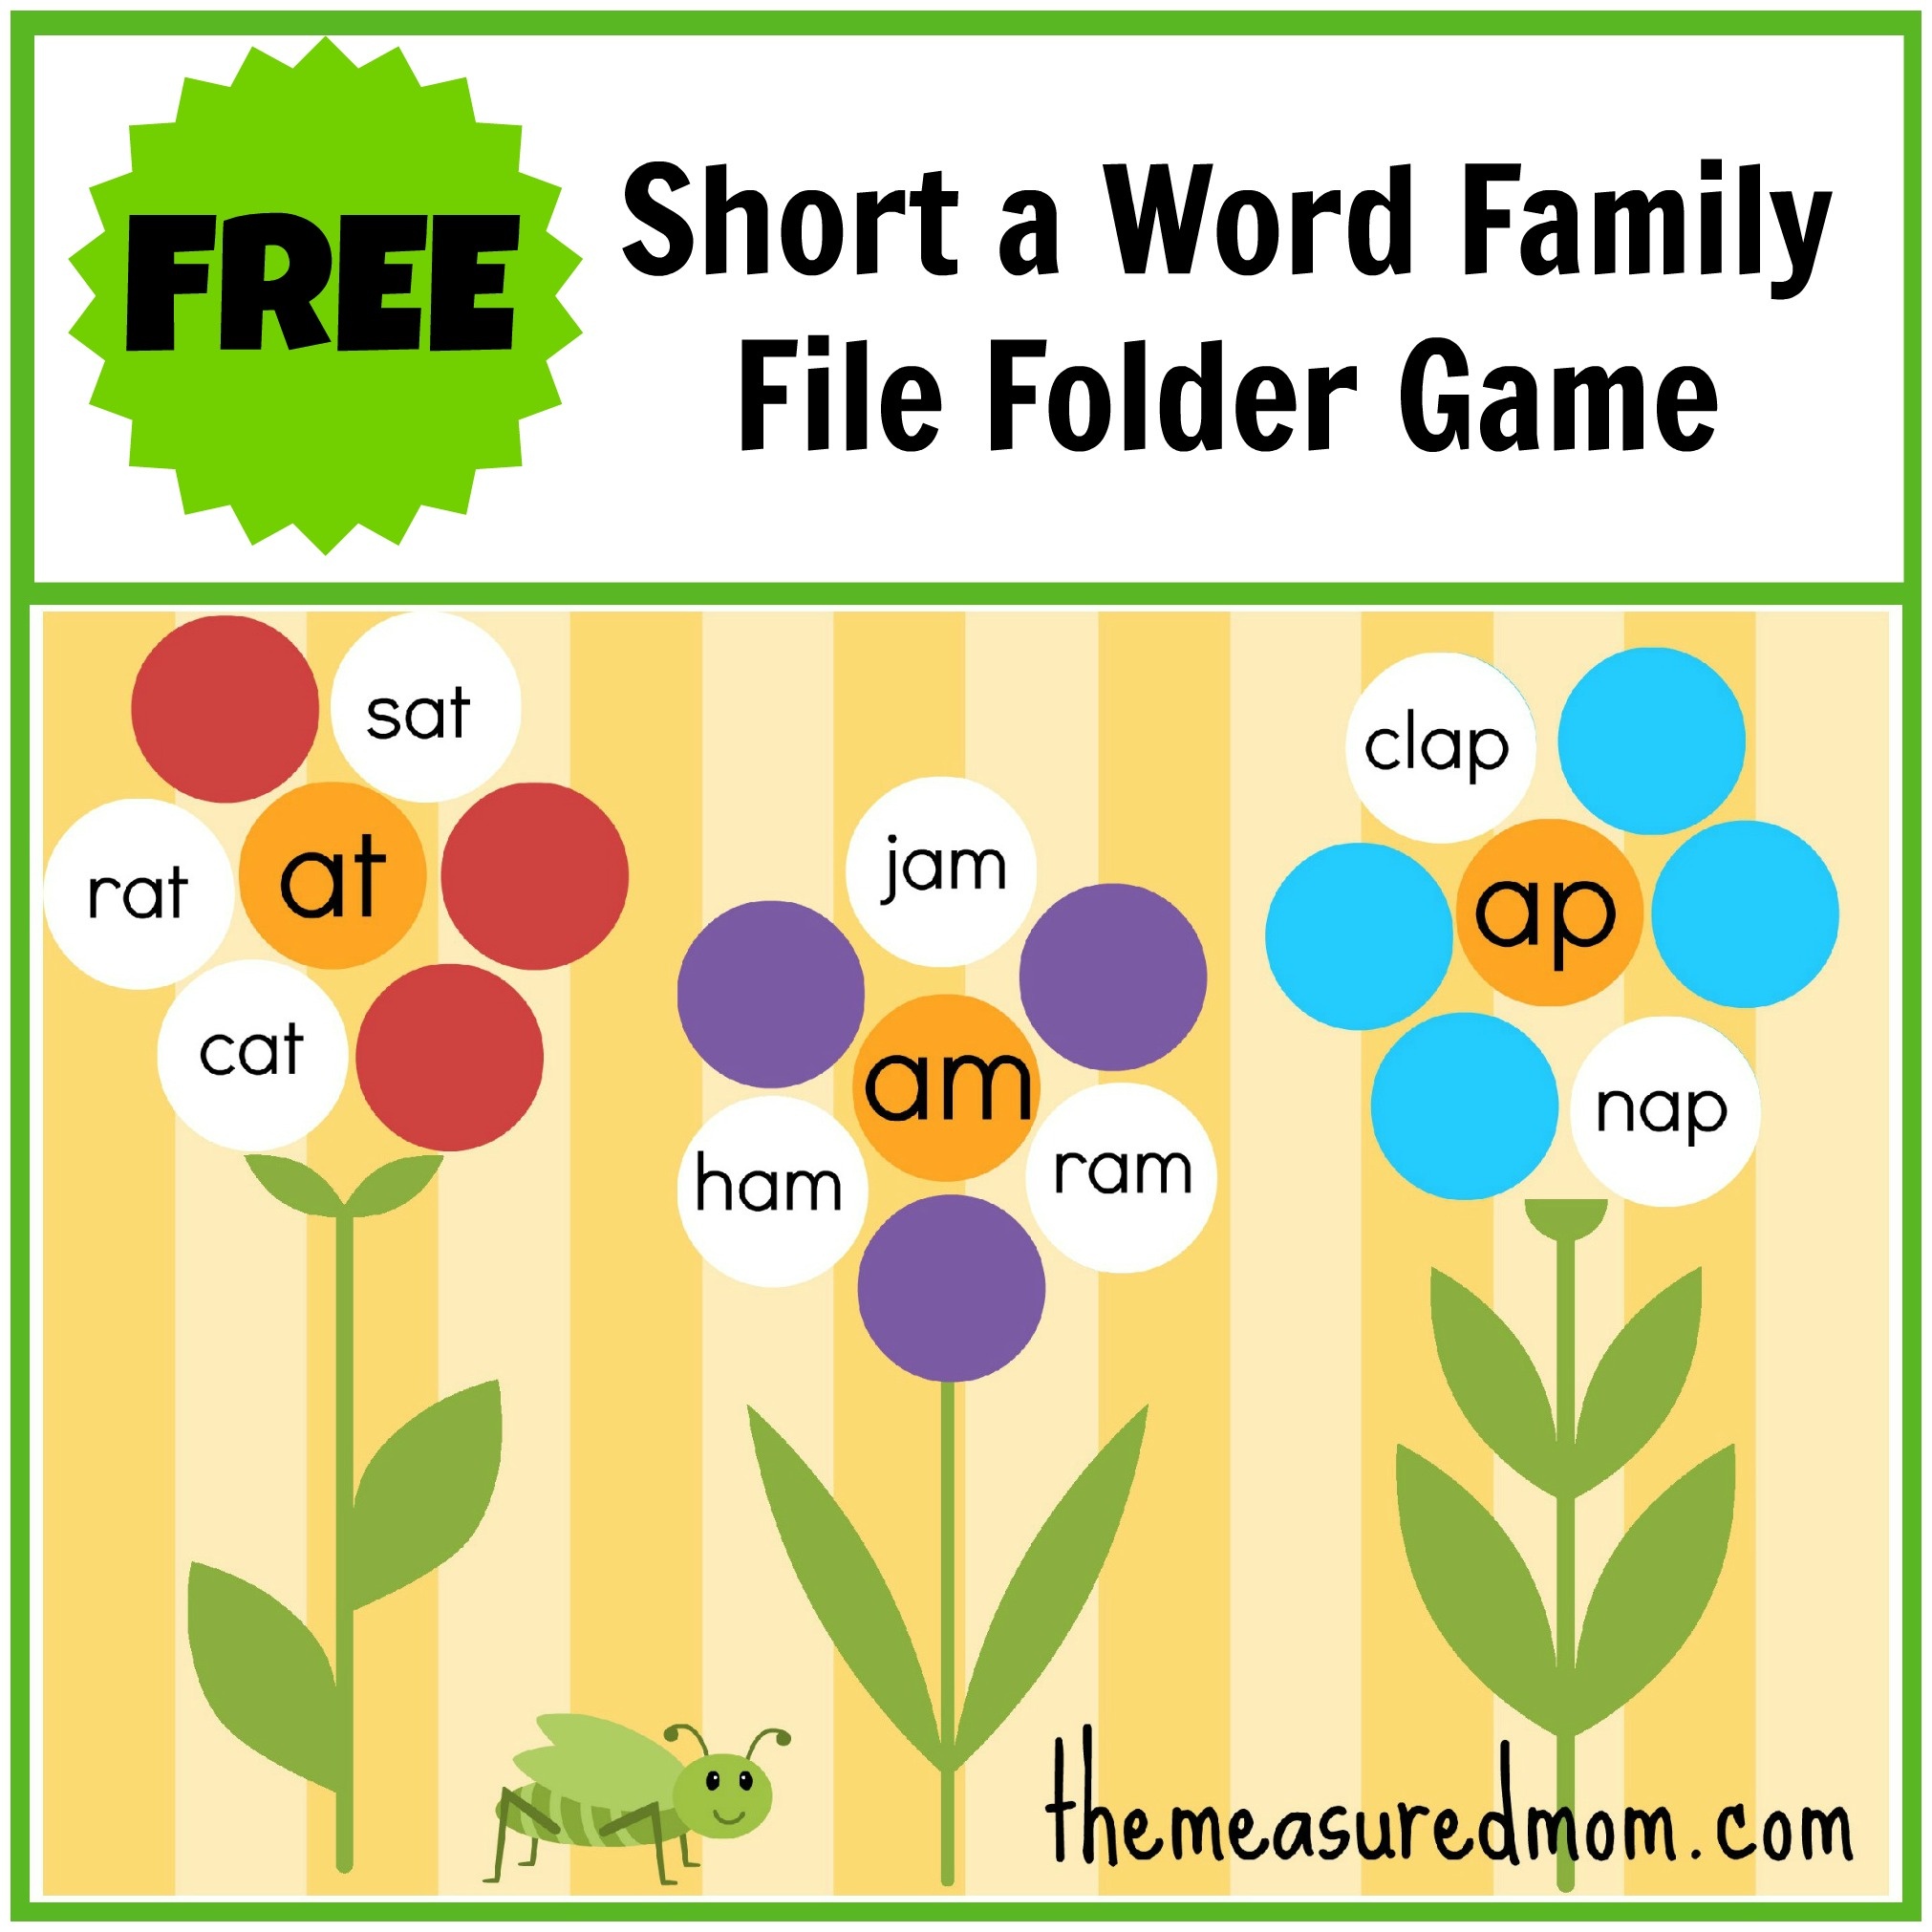 Free Word Family File Folder Game: Short A - The Measured Mom - Free Printable Word Family Games